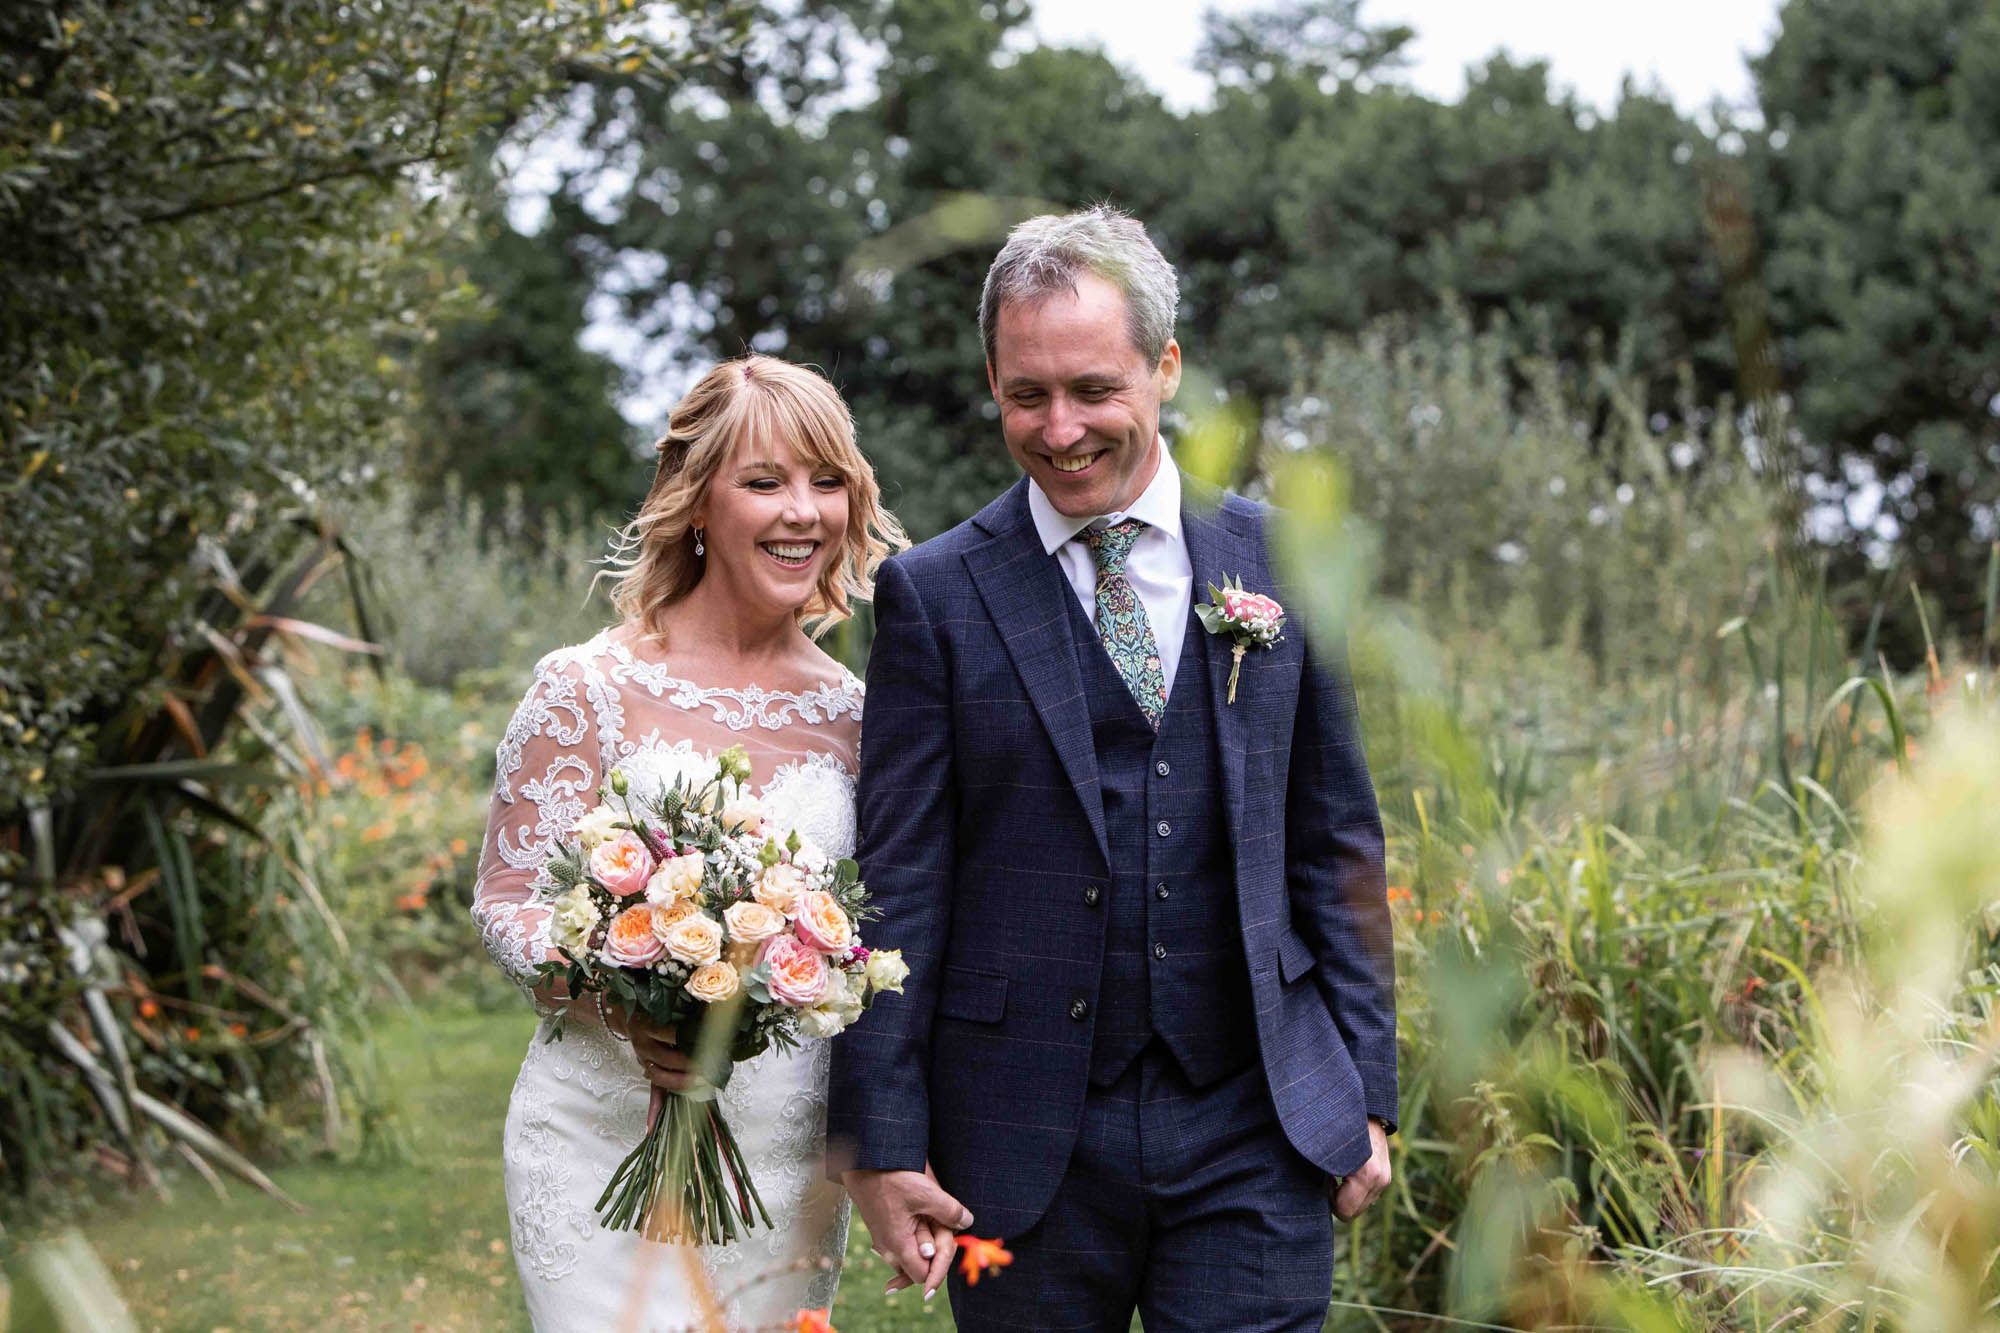 Mature couple on their wedding day. The bride is carrying a bouquet of pale roses and wearing a lace embroidered dress. The groom's in a dark blue suit with waistcoat and they're holding hands. By Snapdragon Photography